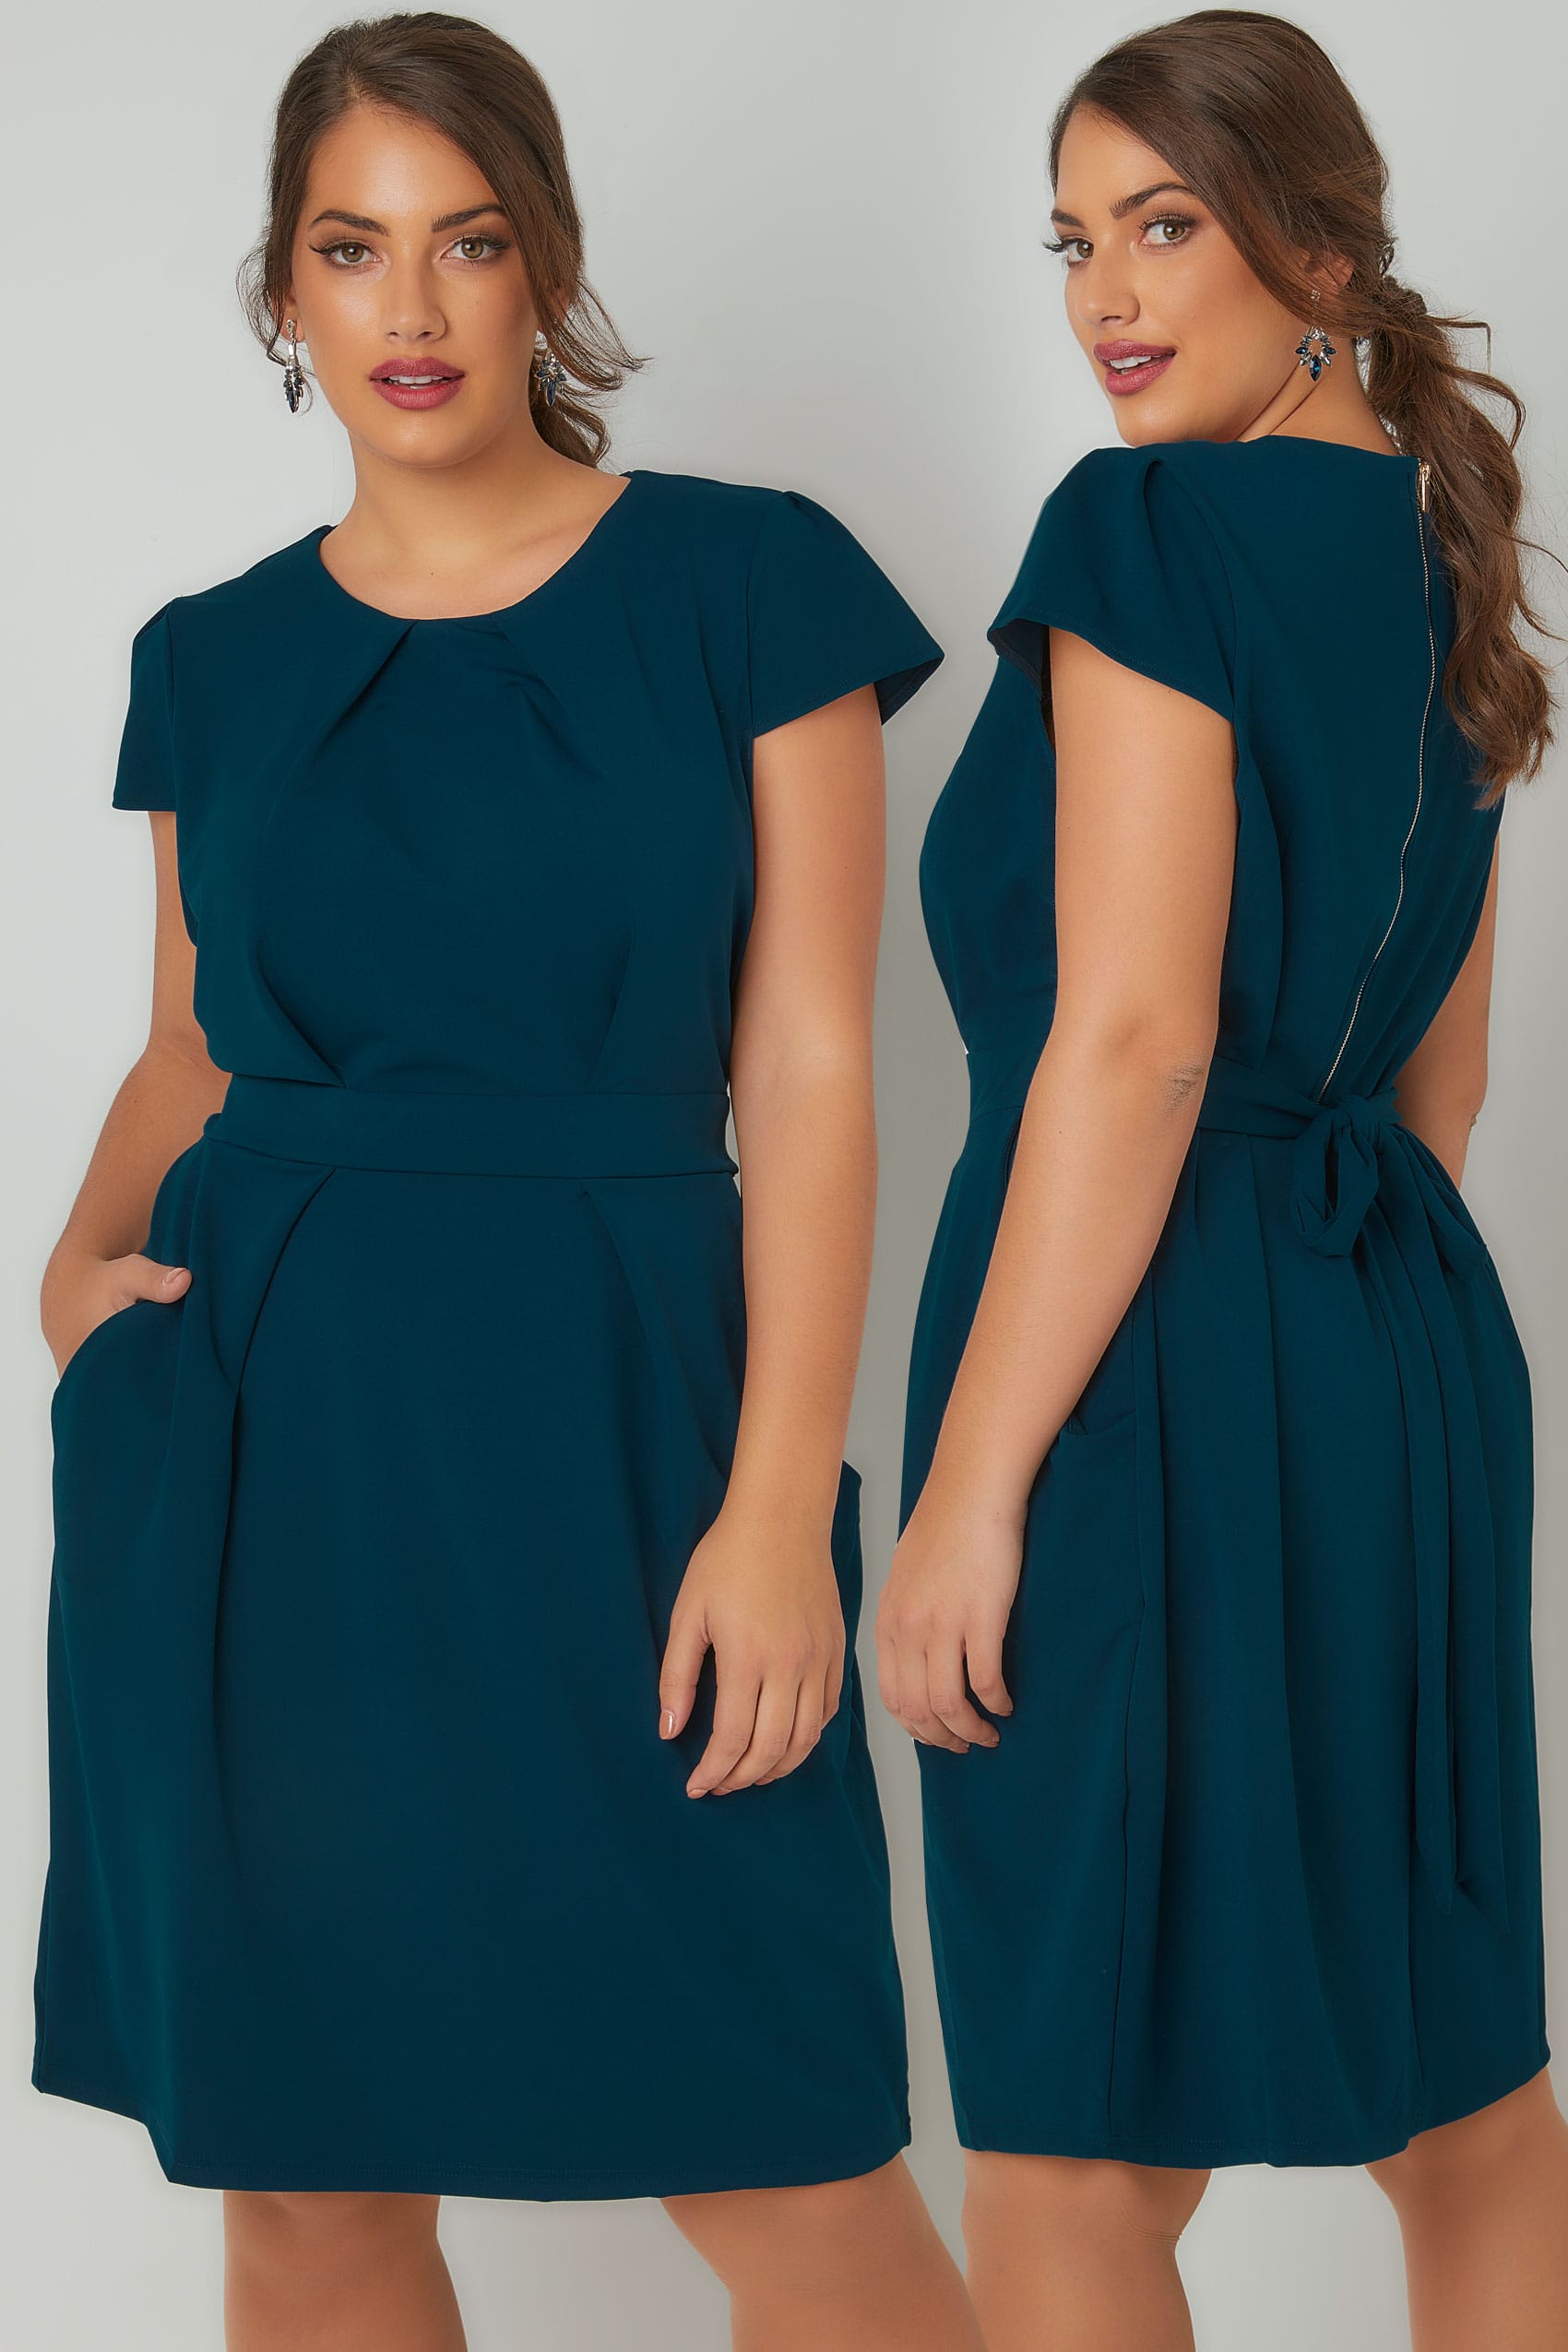 BLUE VANILLA CURVE Teal Blue Shift Dress With Pockets, Plus size 18 to 28